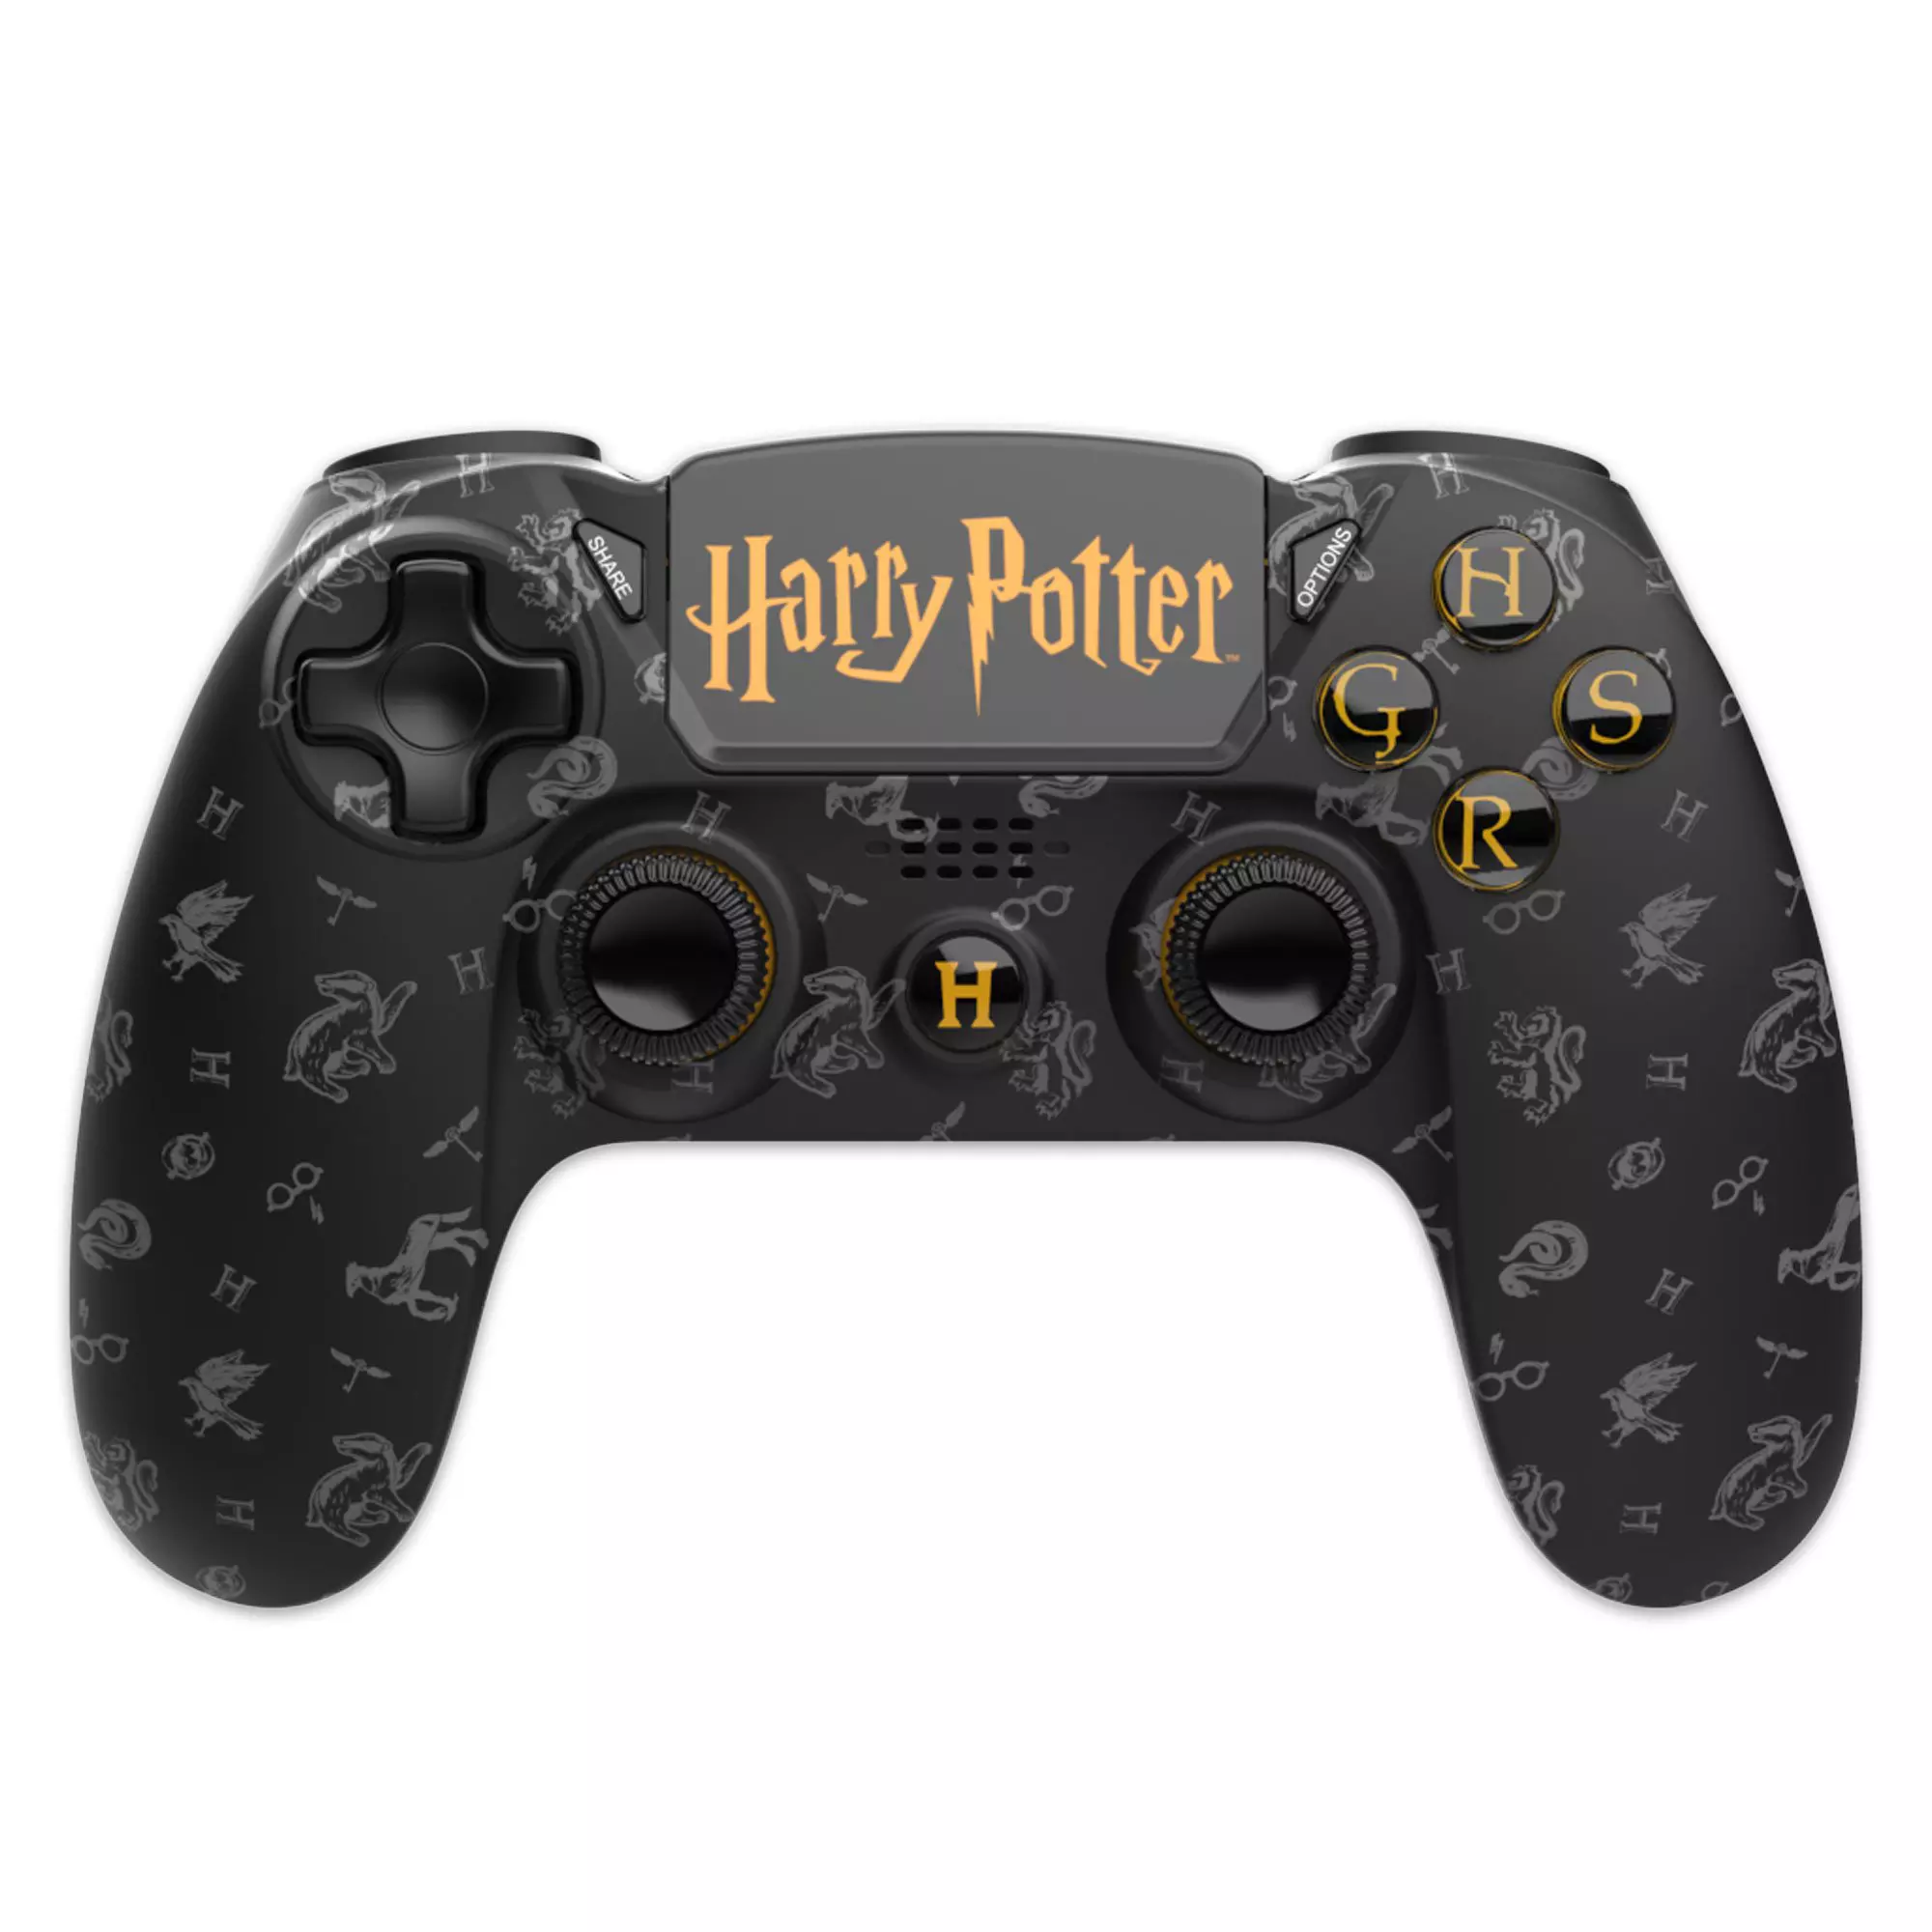 Harry Potter Ps4 Wireless Controller Black